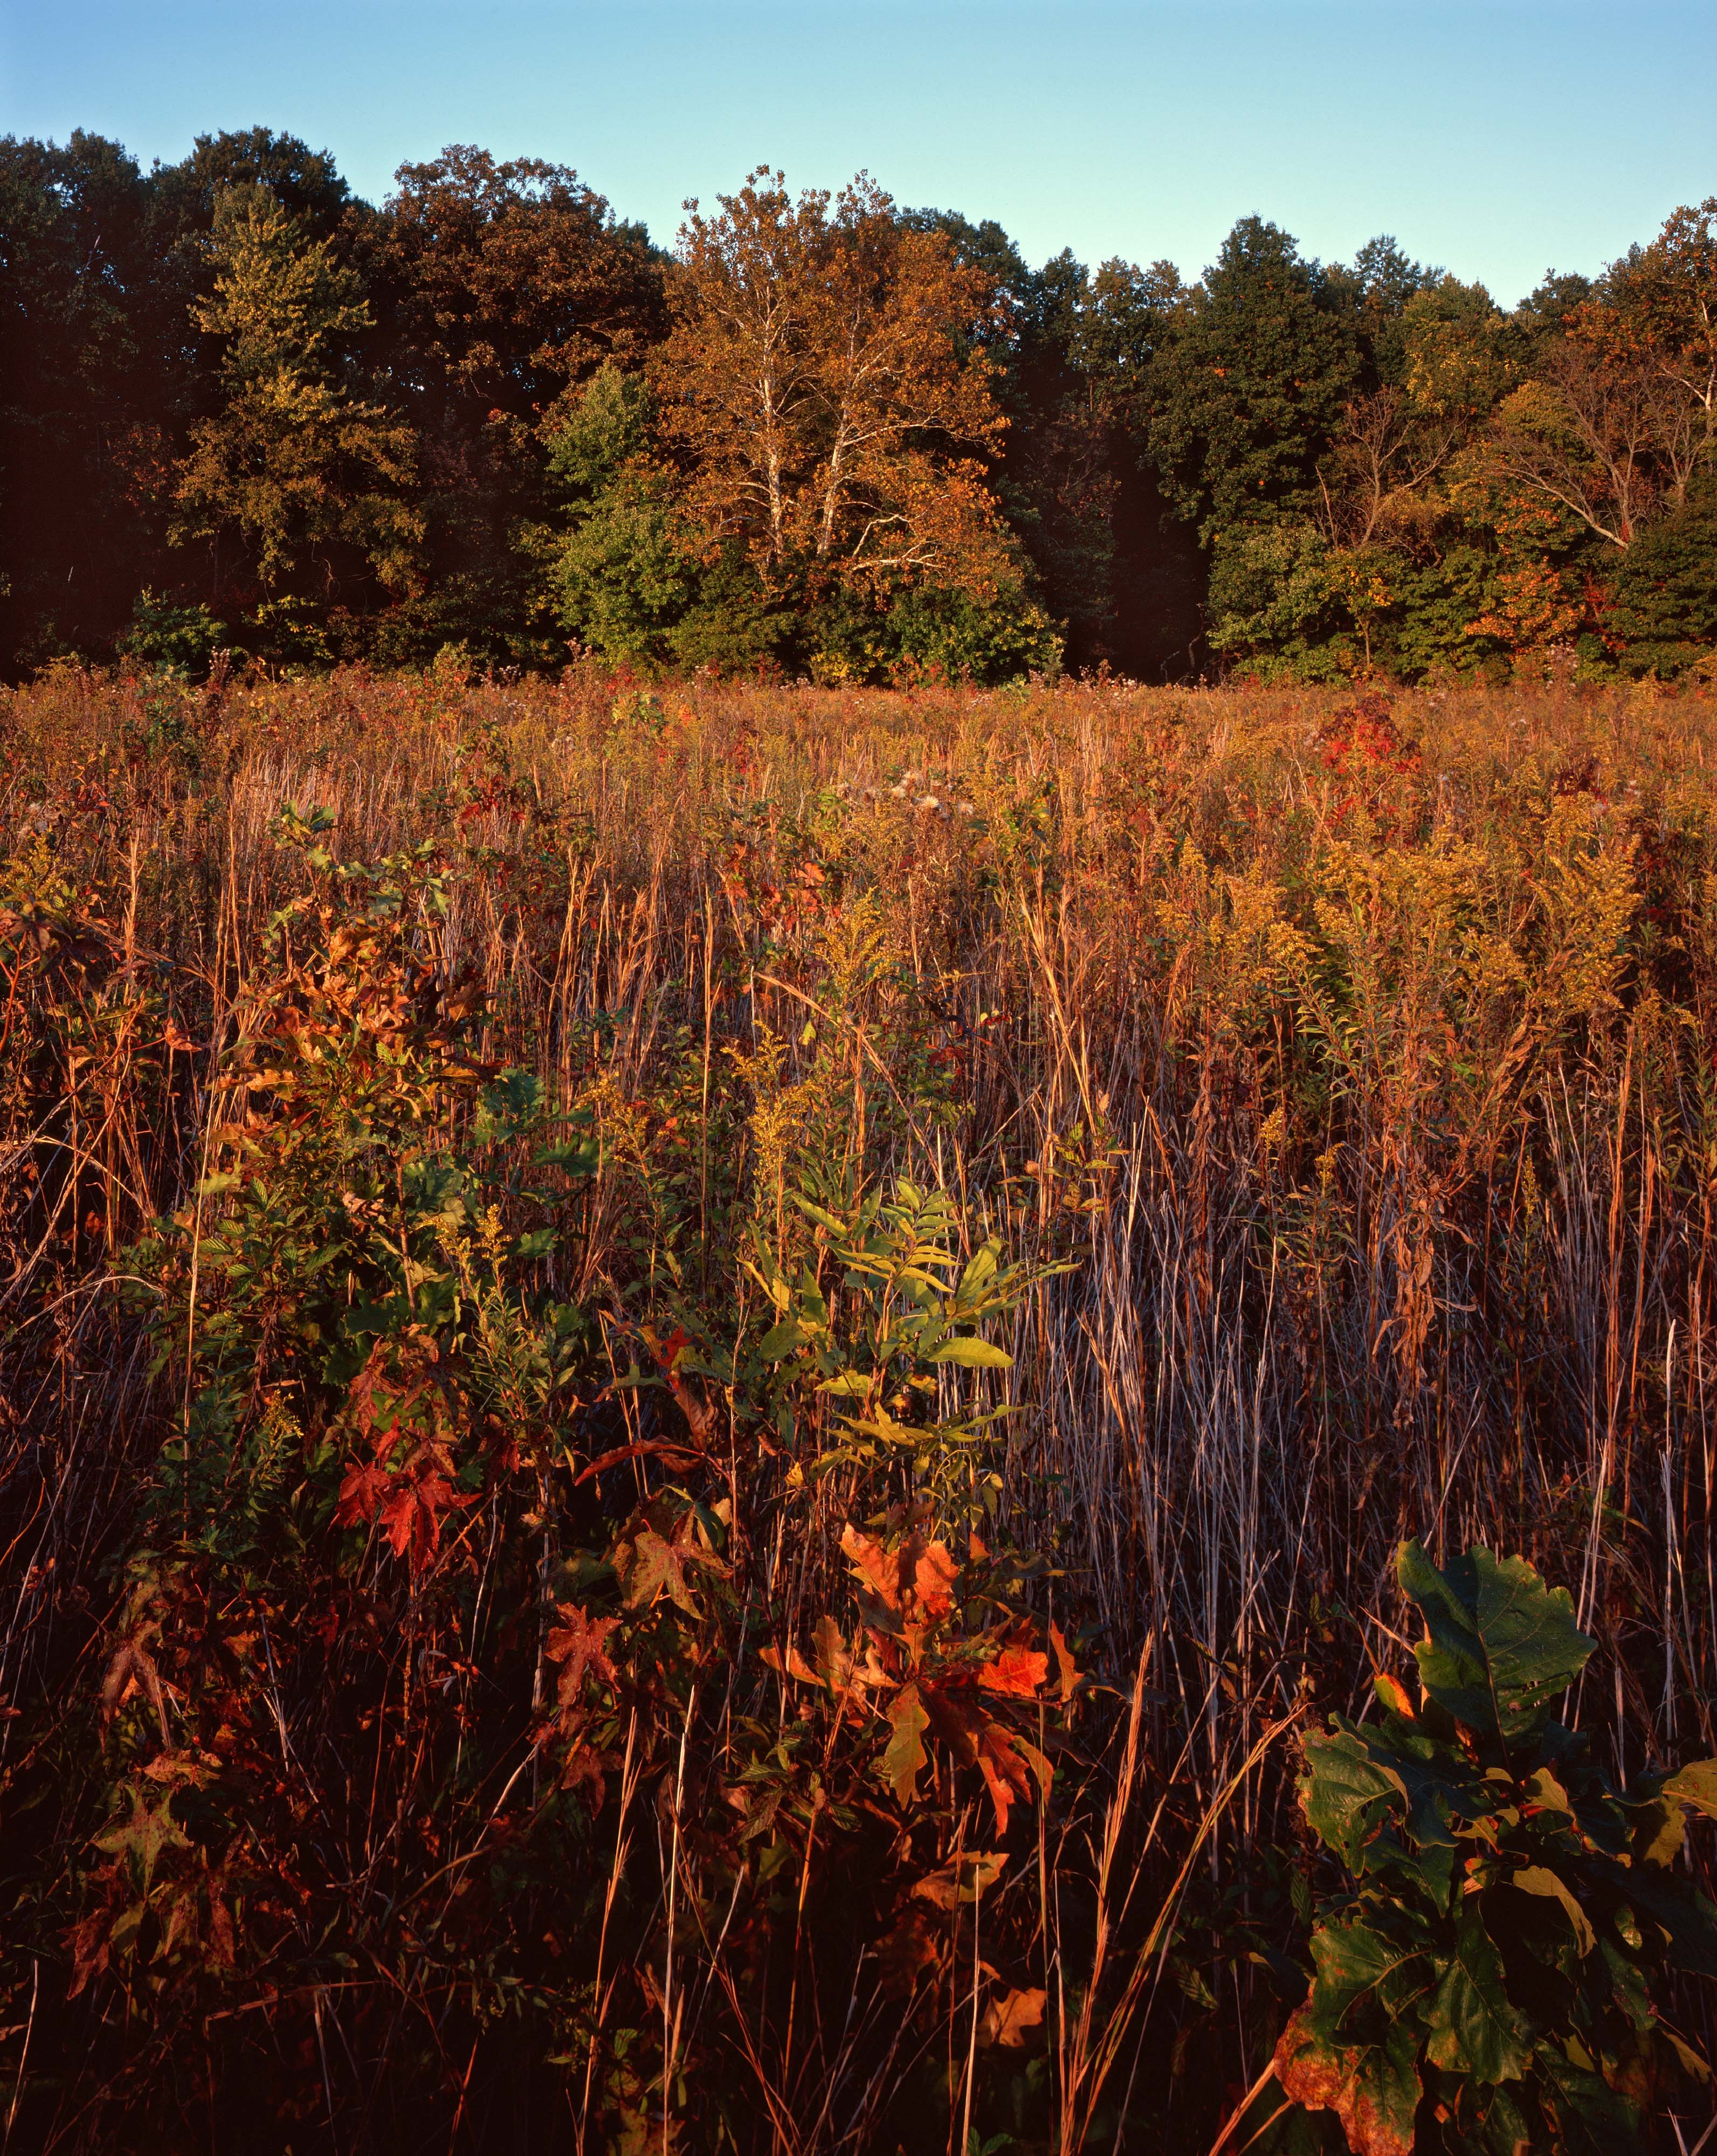 Meadow with forest in background in autumn.